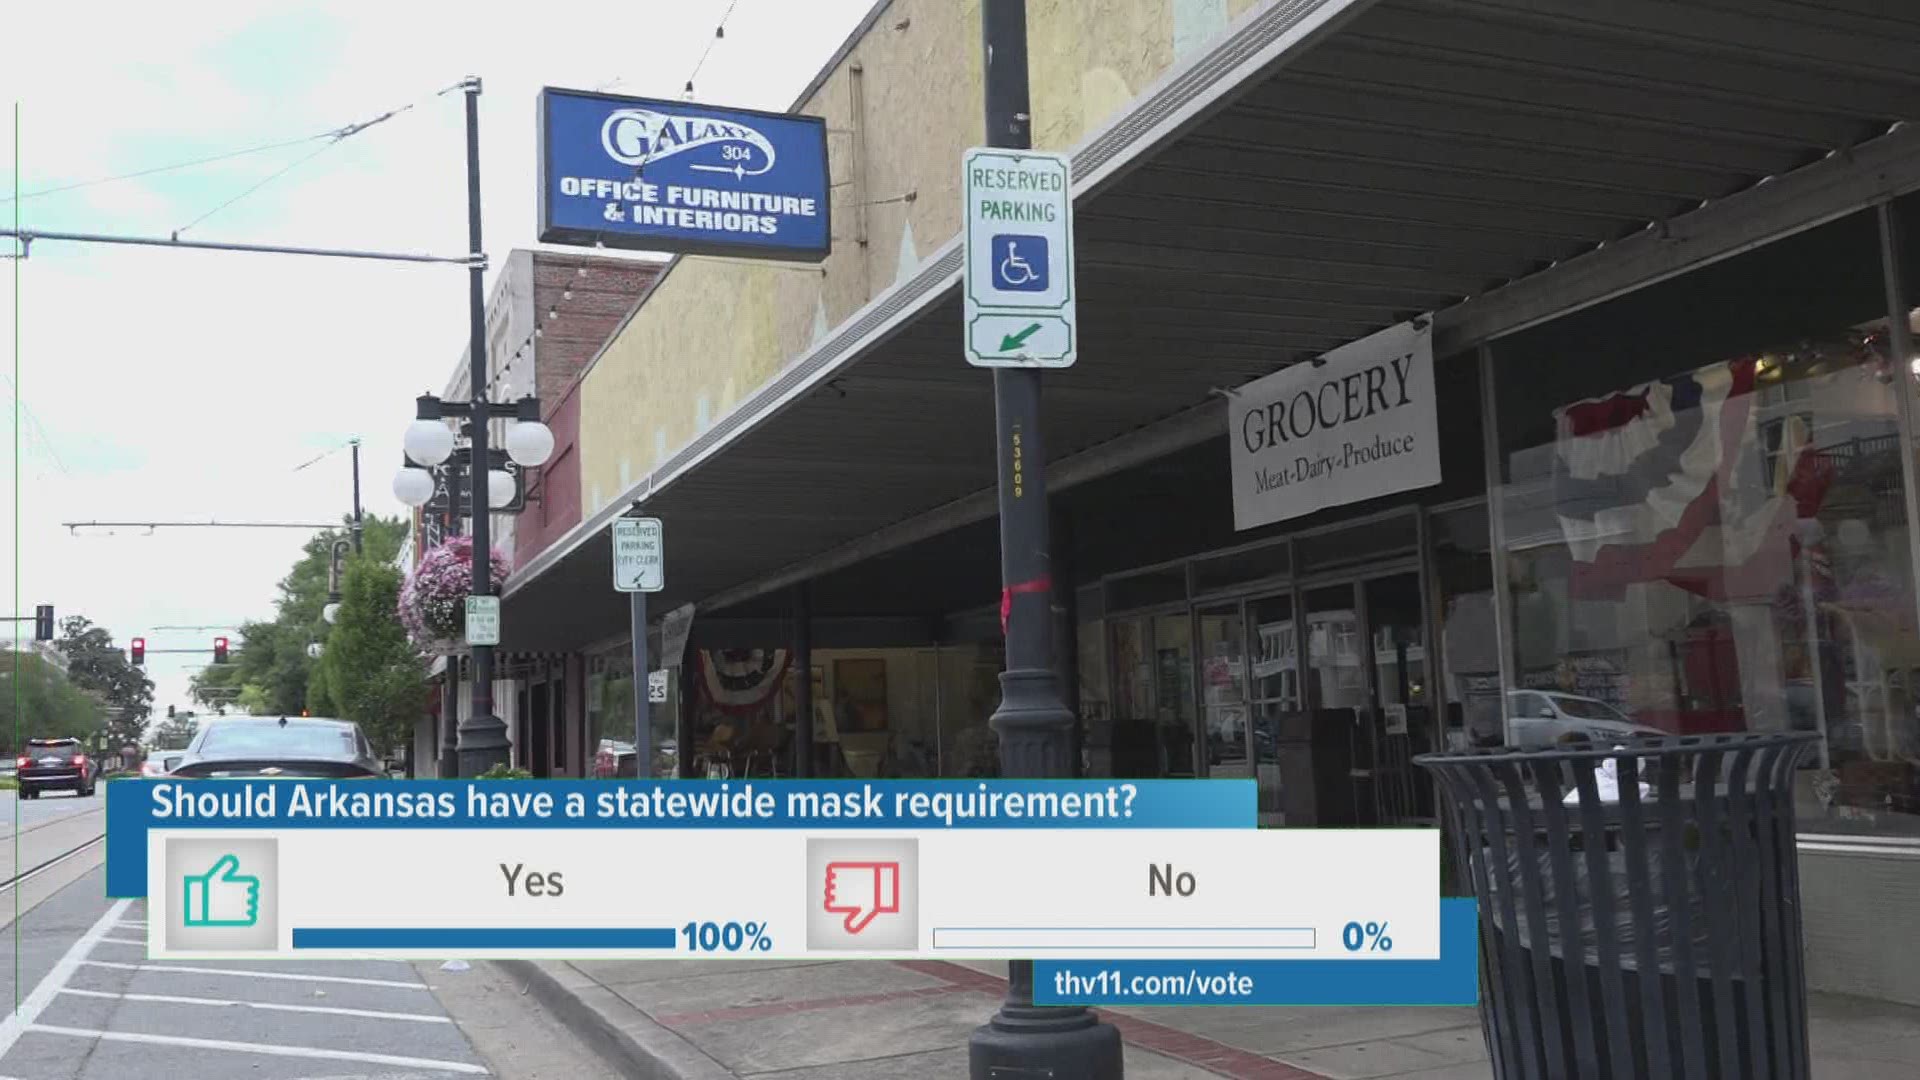 The North Little Rock city council passed an ordinance that requires masks inside businesses.